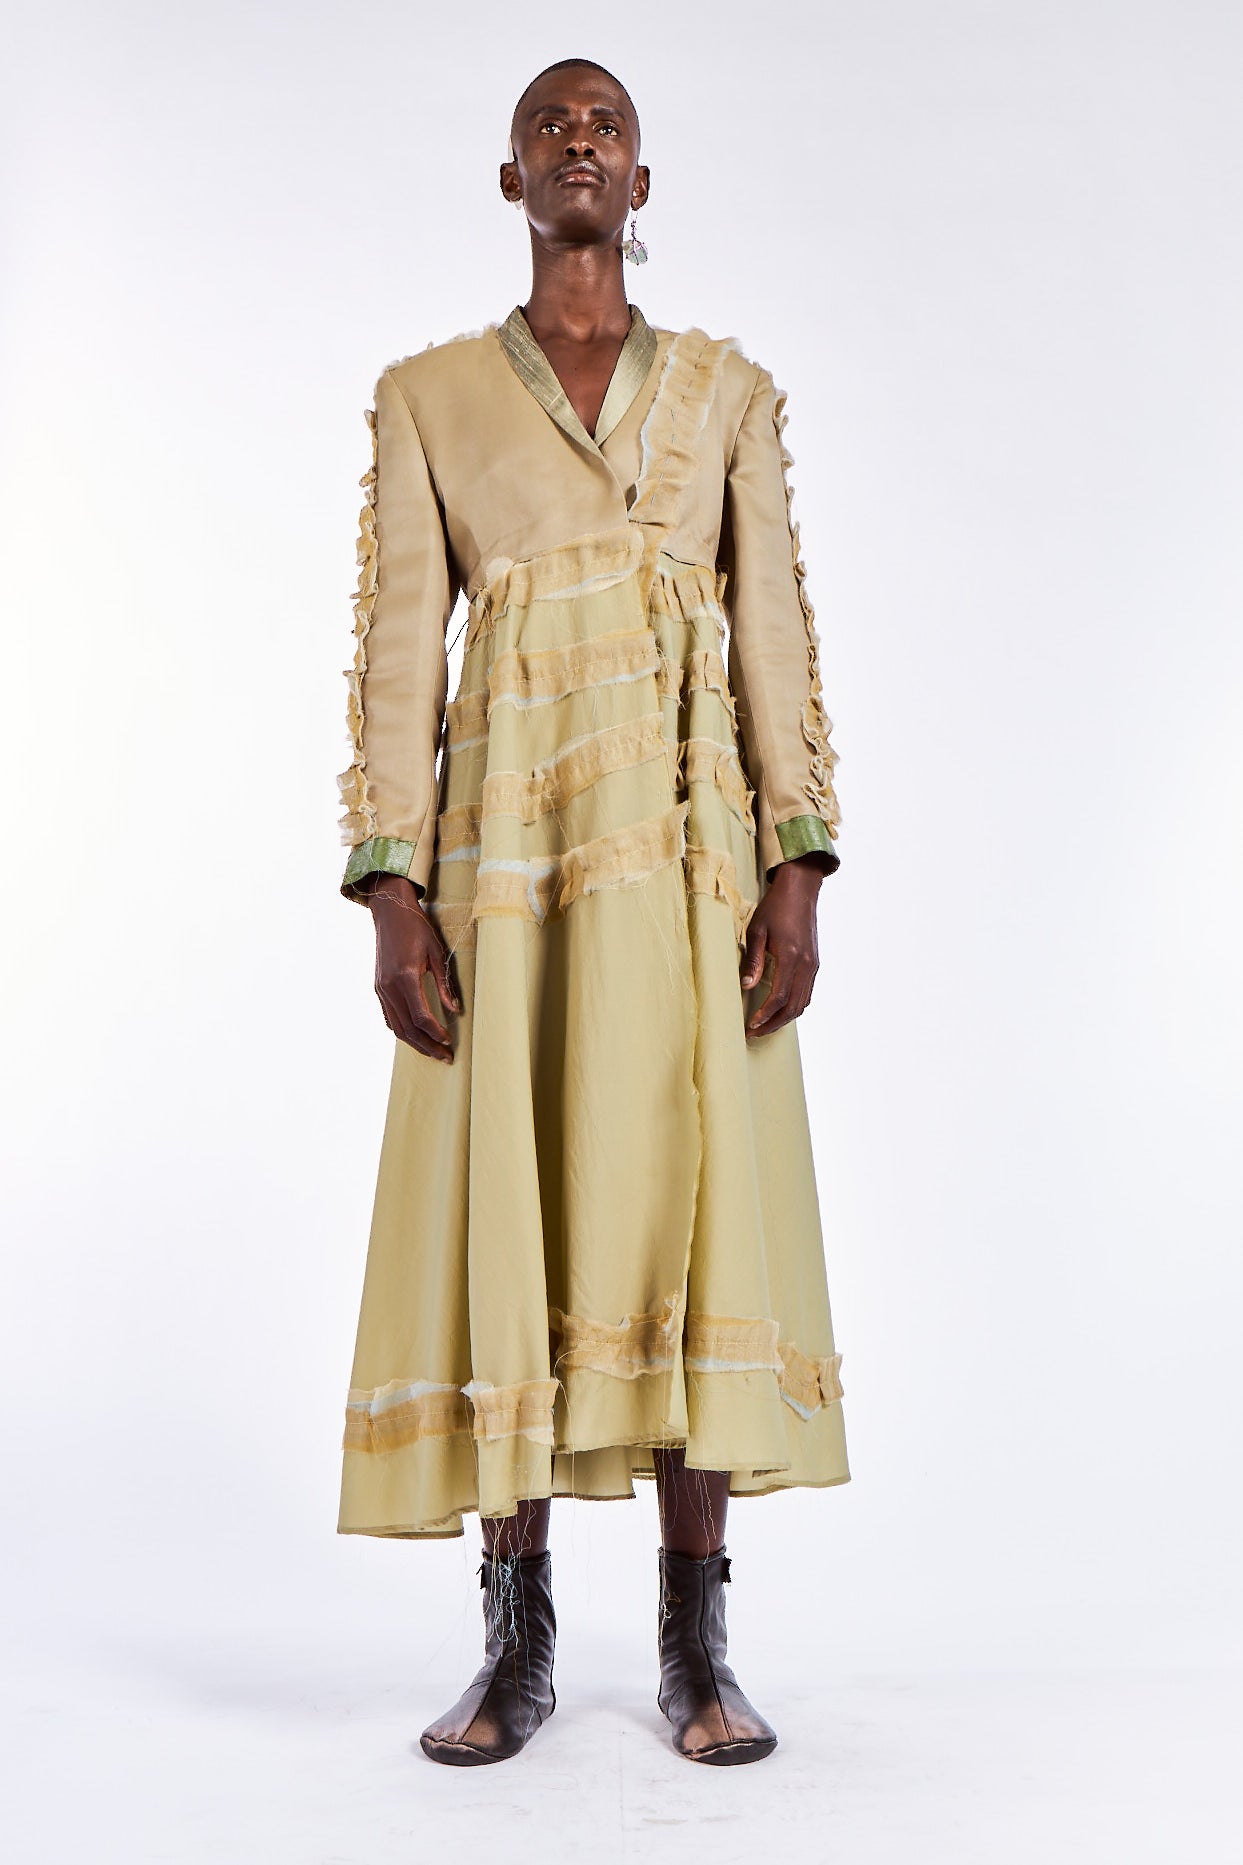 Barchan Dune Artisanal Silk Dress with Hand Embroidery Stitches